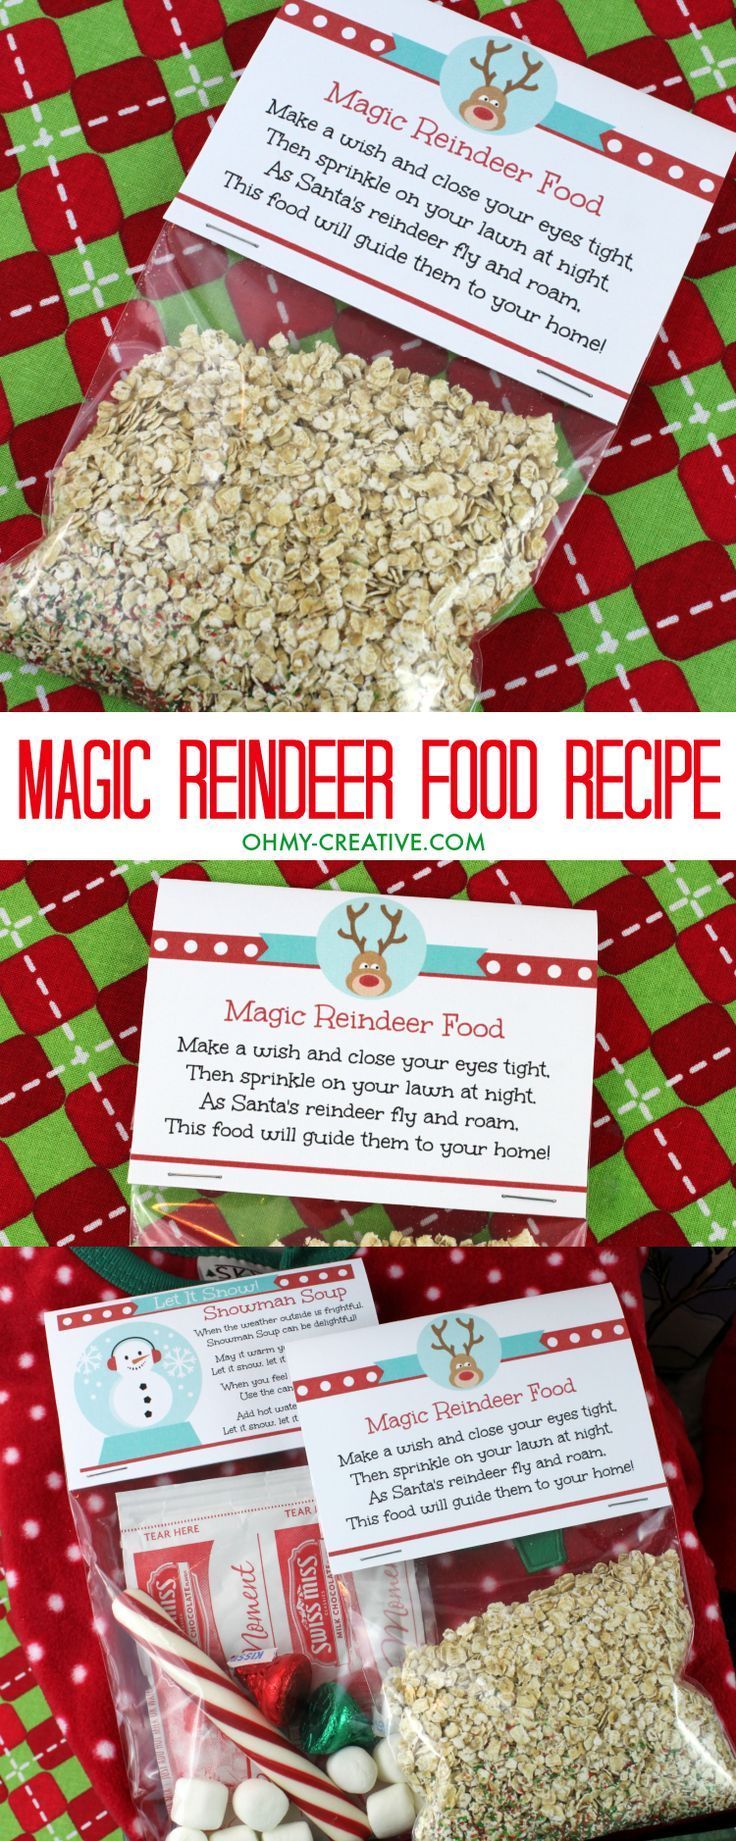 This Magic Reindeer Food Recipe is super cute for kids to sprinkle in the yard to guide the reindeer and Santas sleigh to their